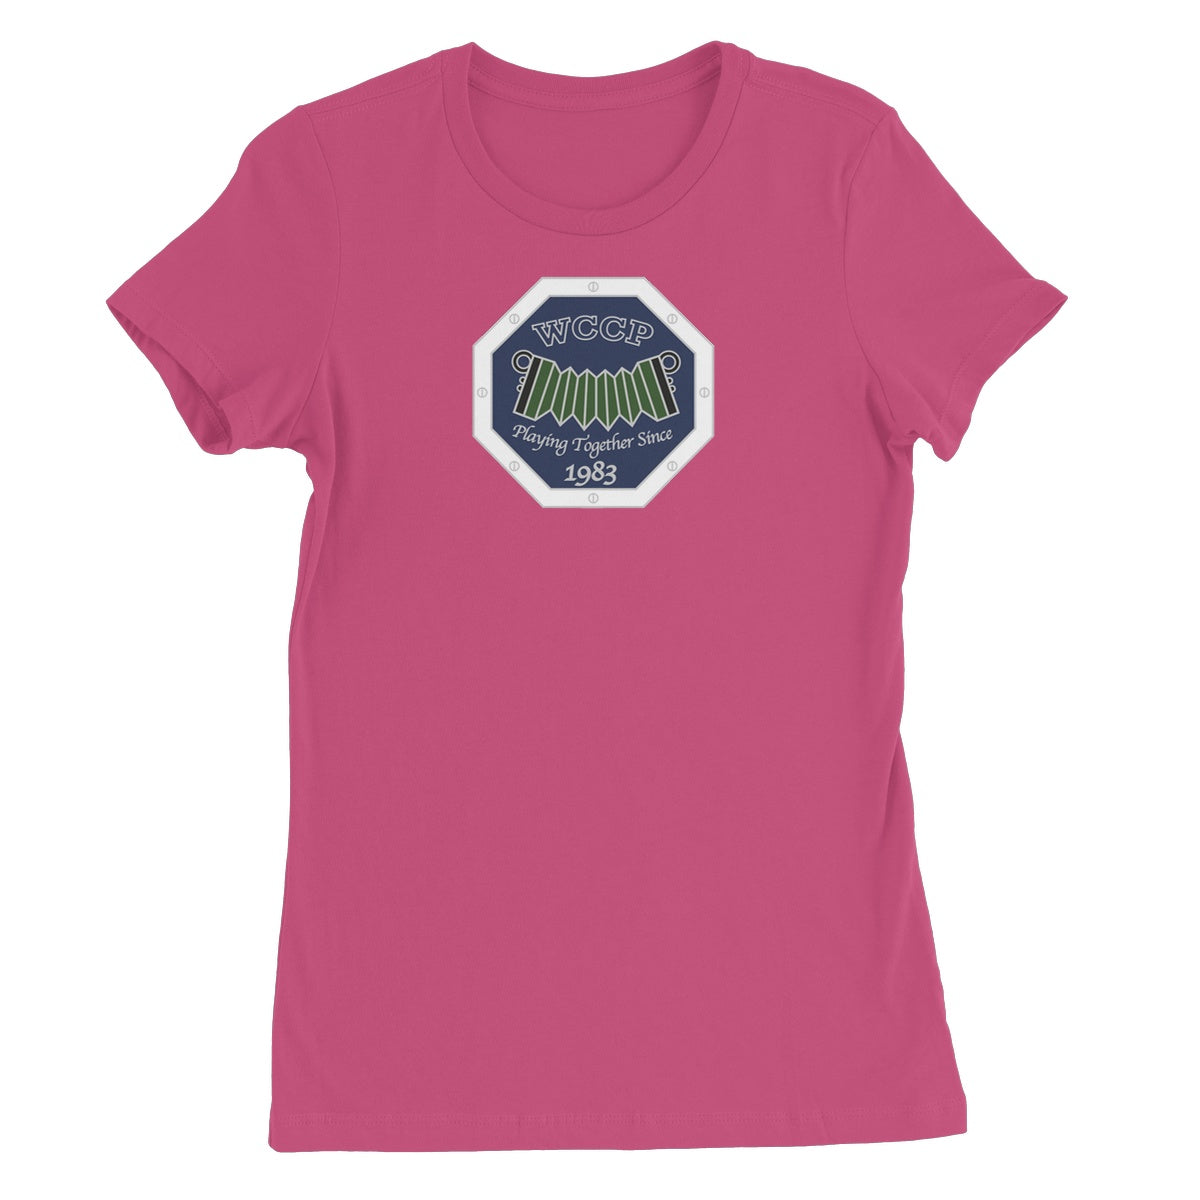 West Country Concertina Players Women's T-shirt